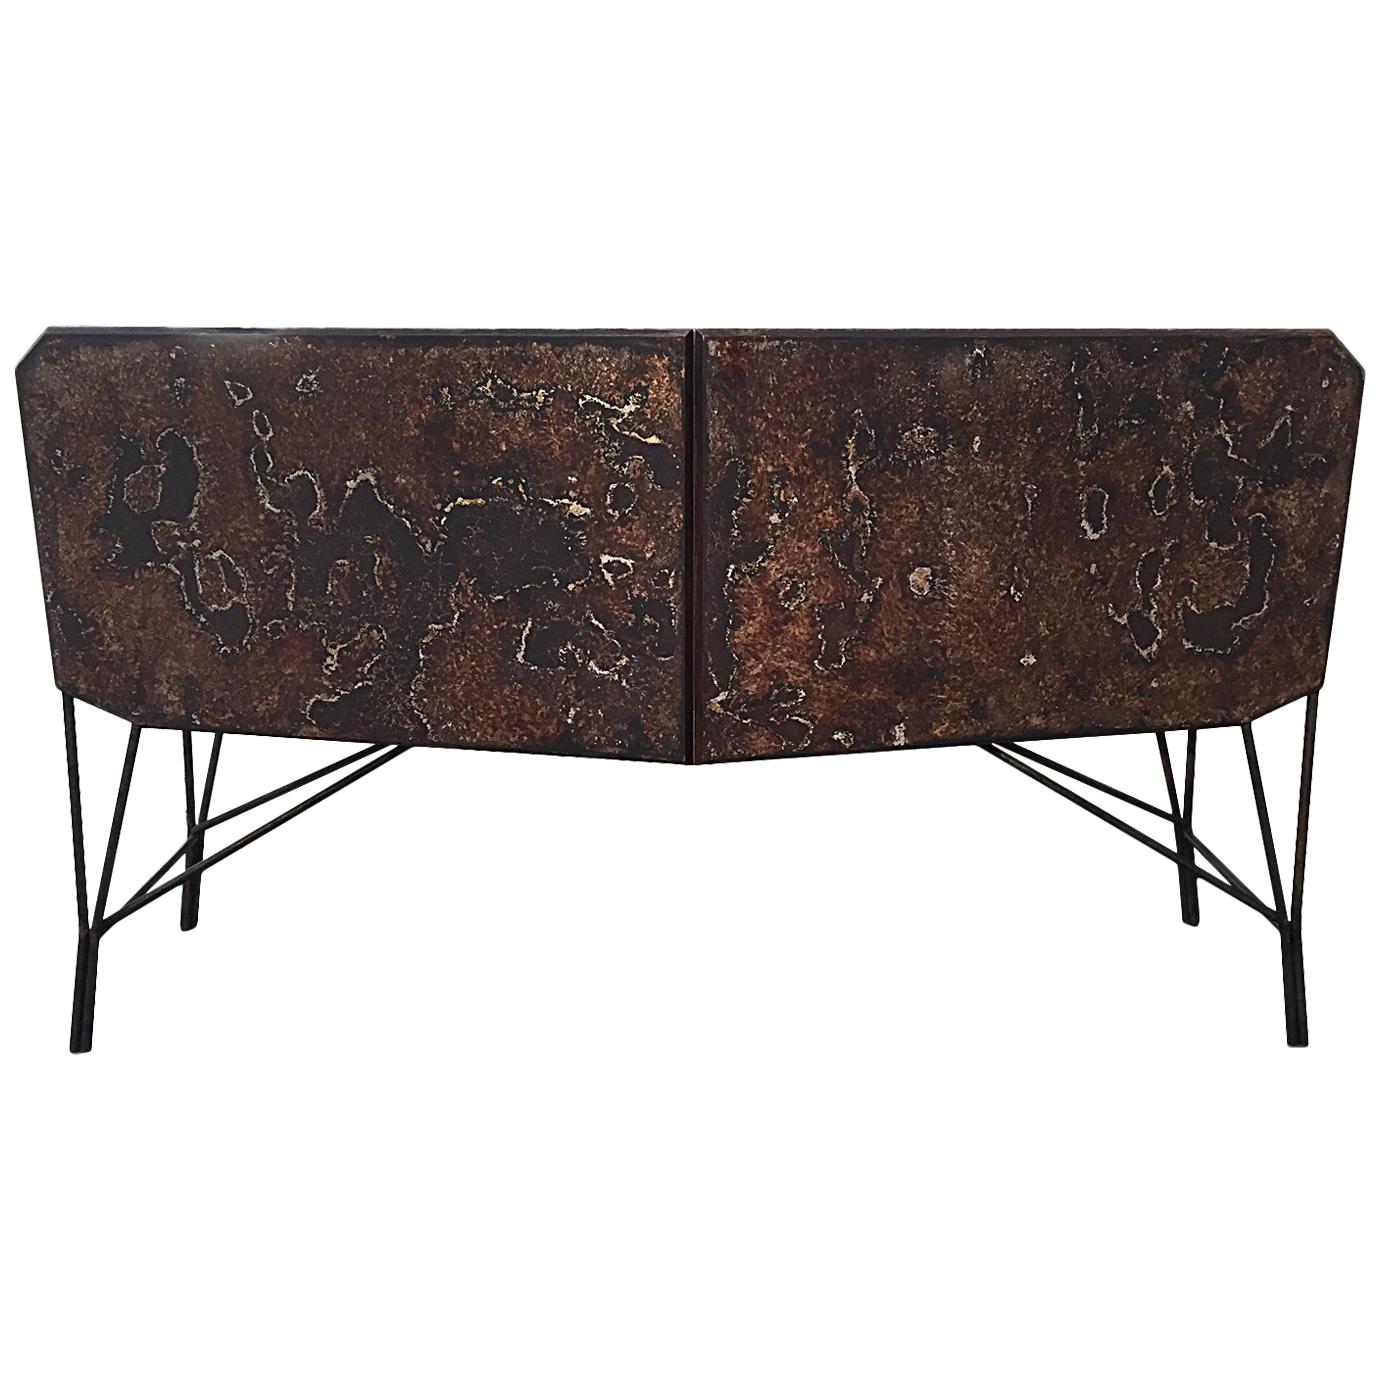 Contemporary Rusty Buffet Triarm, Silver Wood Inside, Limited Edition  For Sale